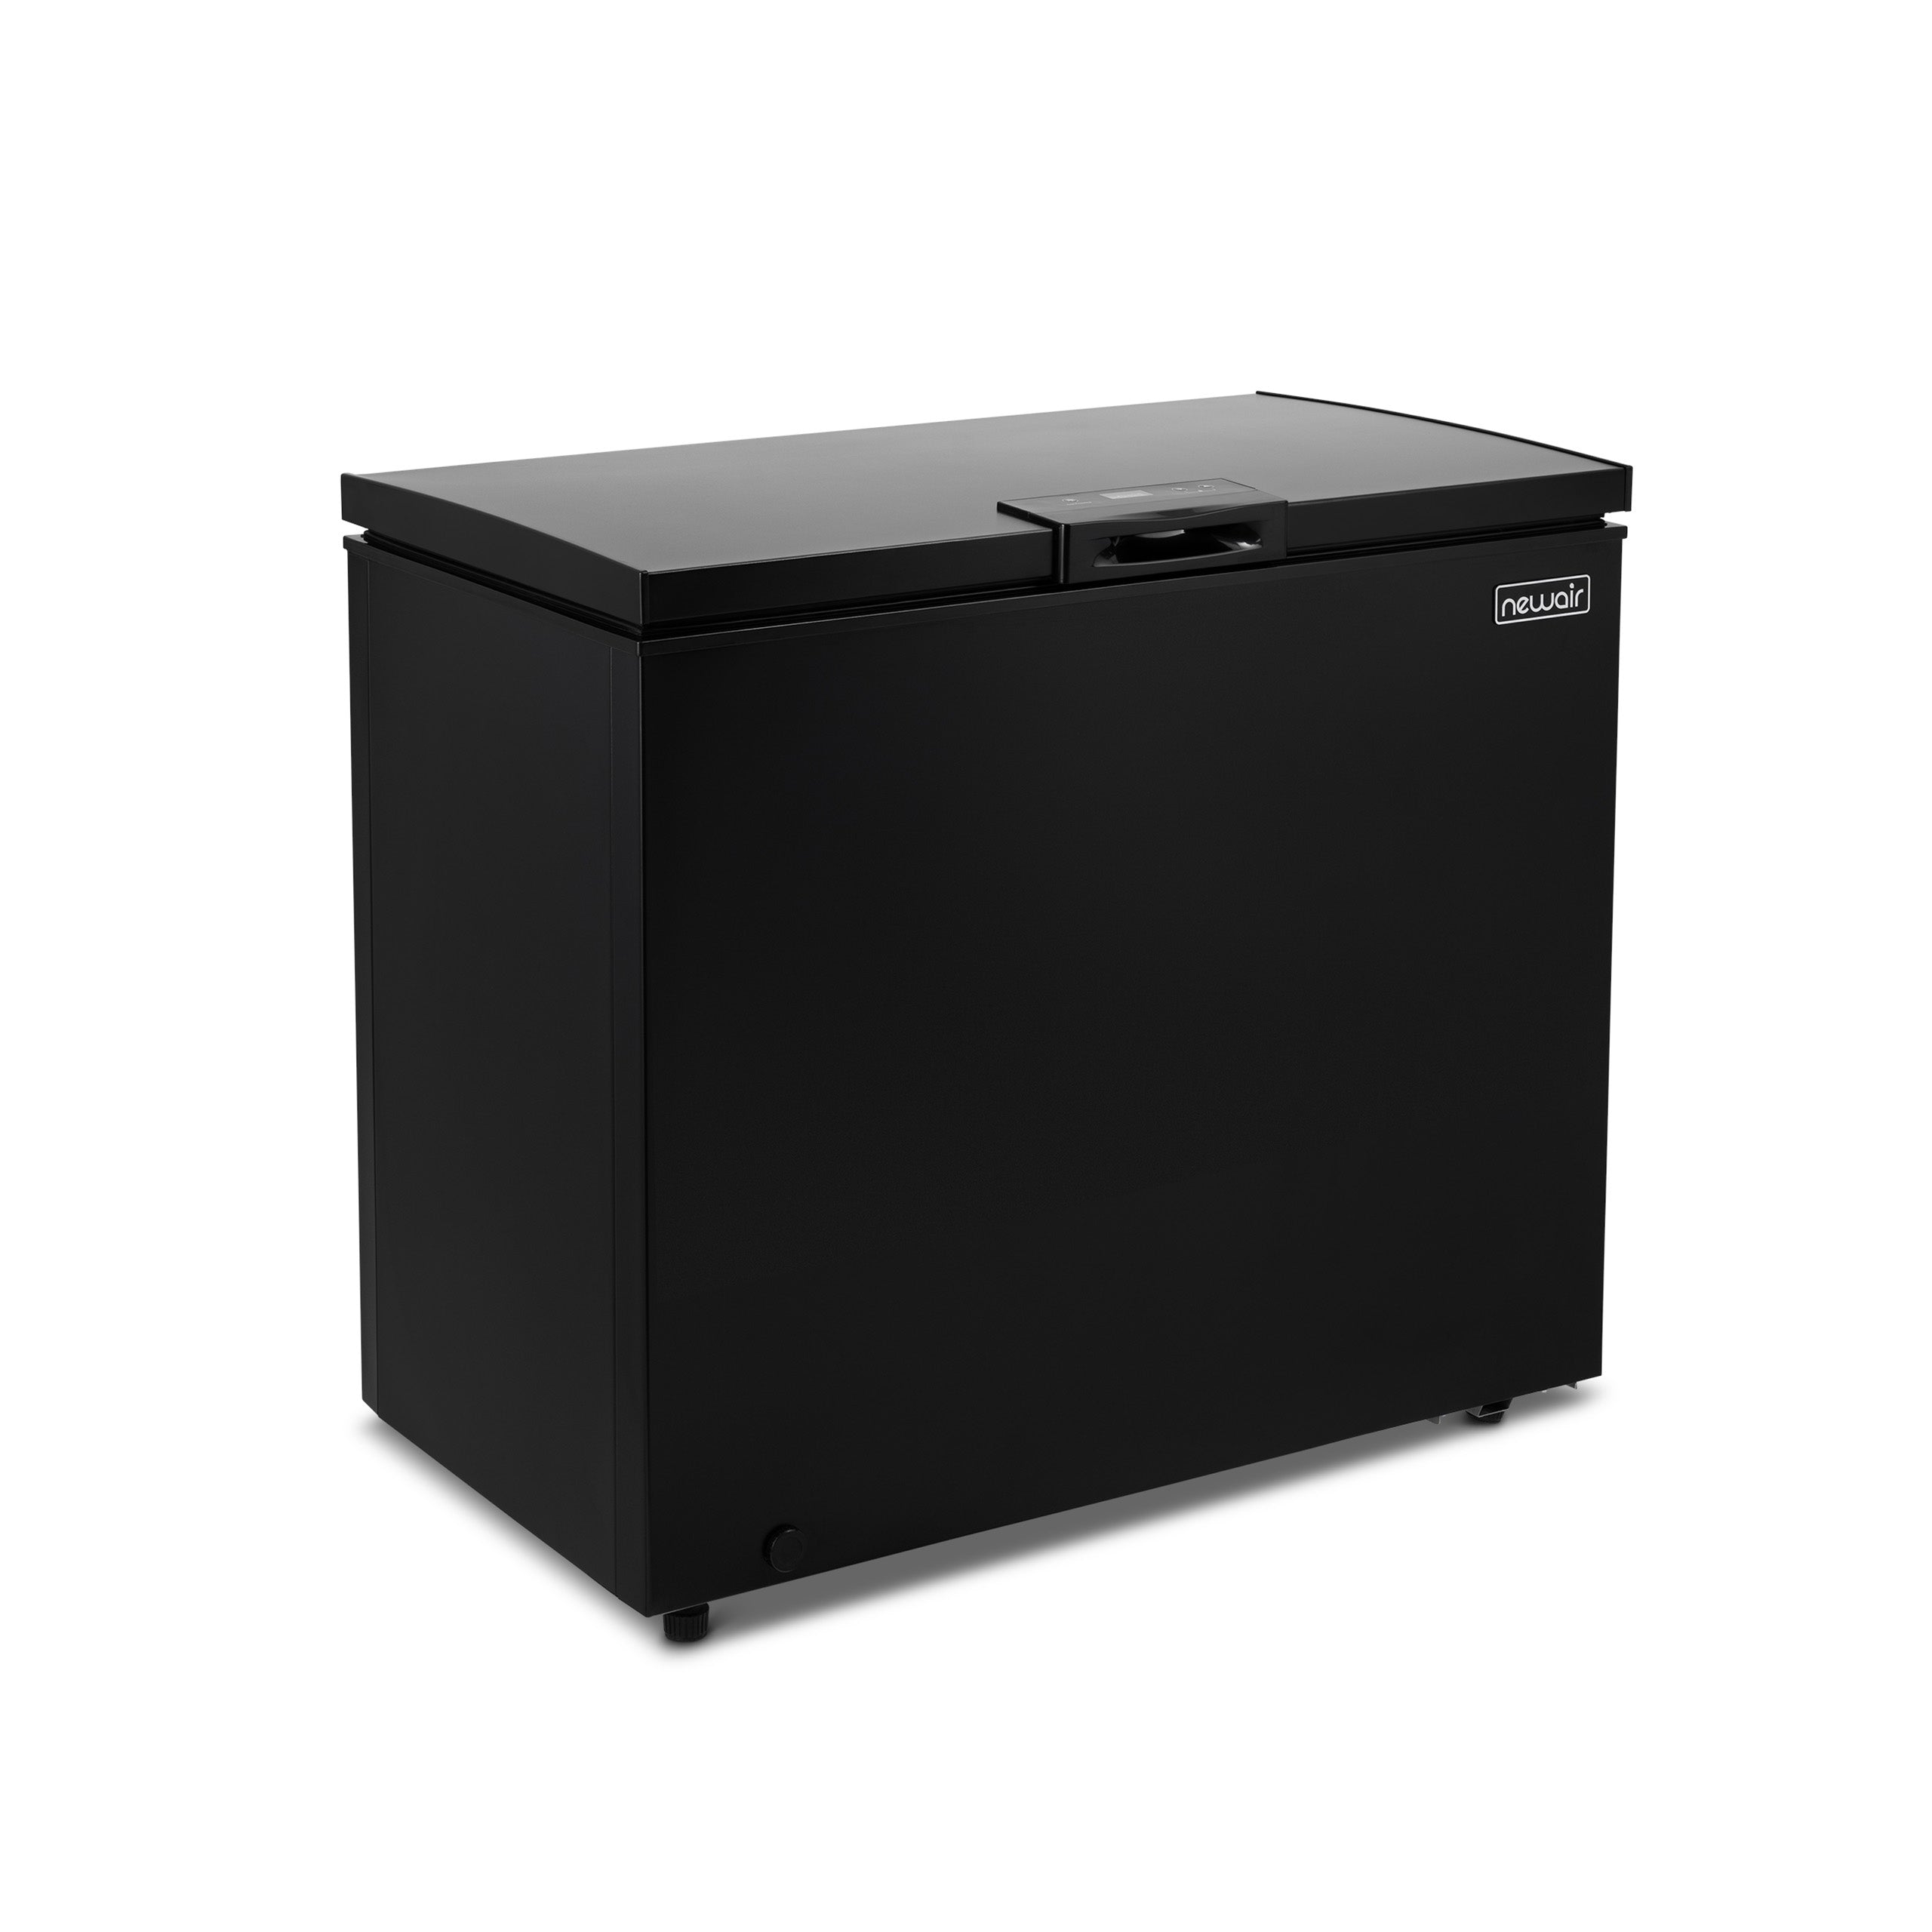 The NewAir Chest Freezer (NFT070MB00) Perfect size to store all of your  Hunting season's meat. 